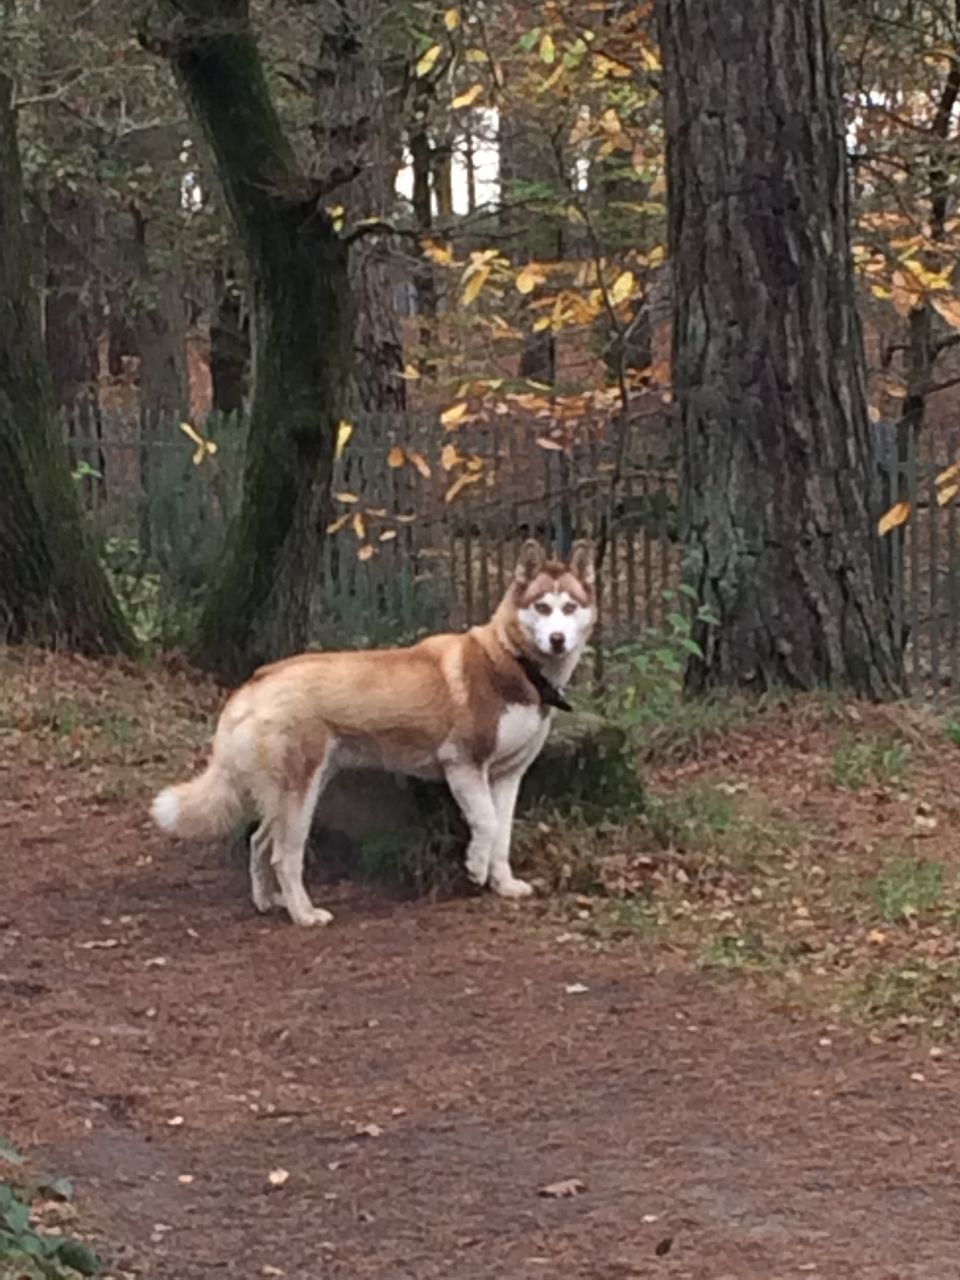 VIEW OF A DOG ON TREE TRUNK